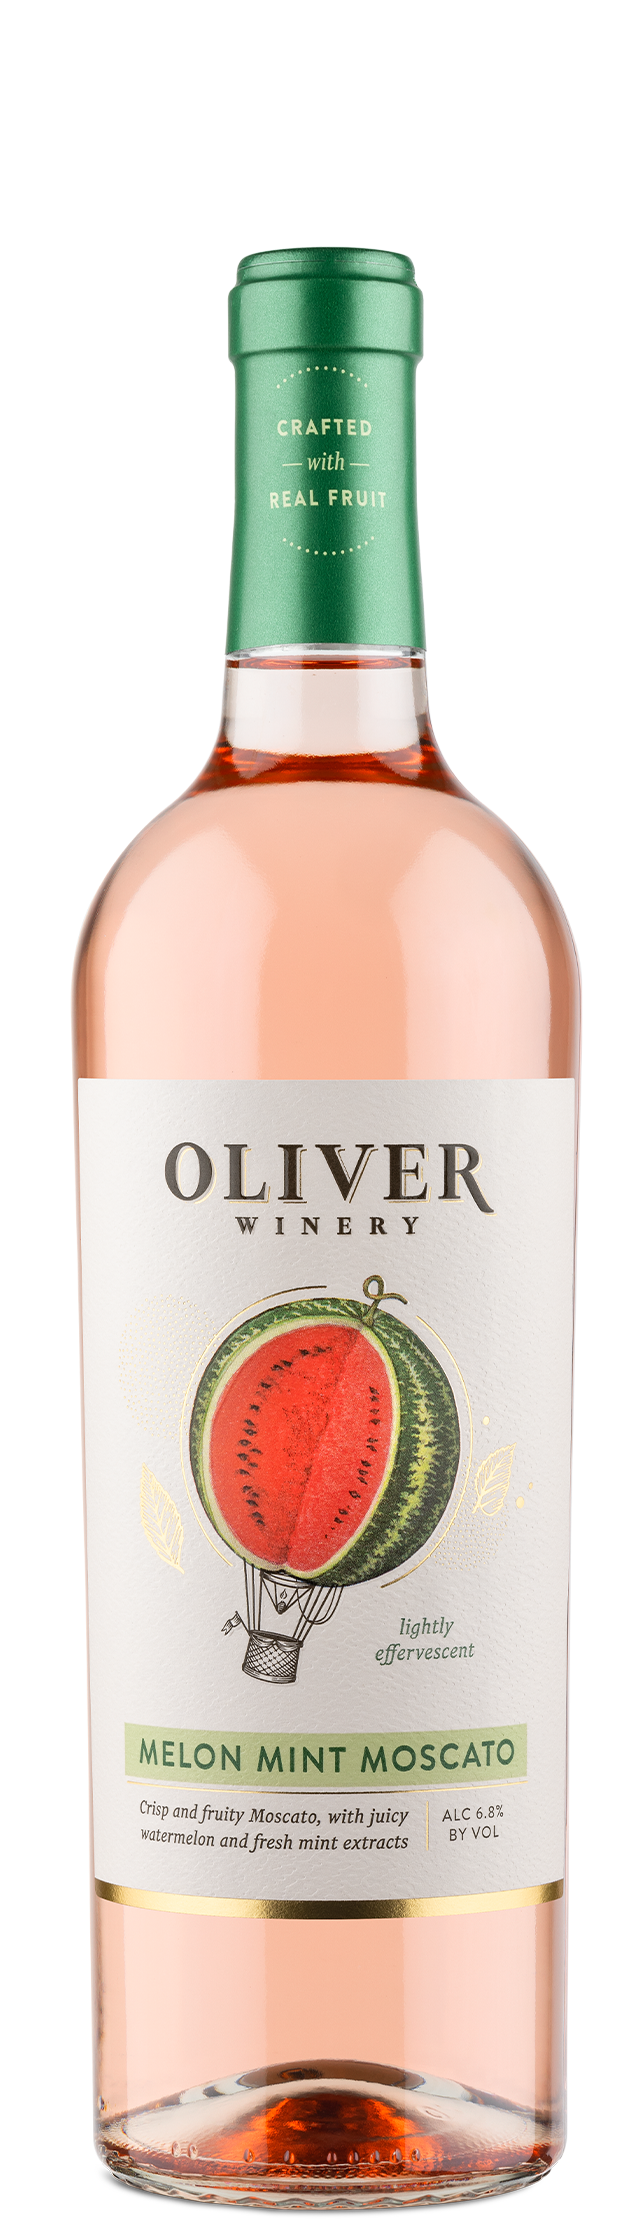 Melon Mint Moscato, new from Oliver Winery 